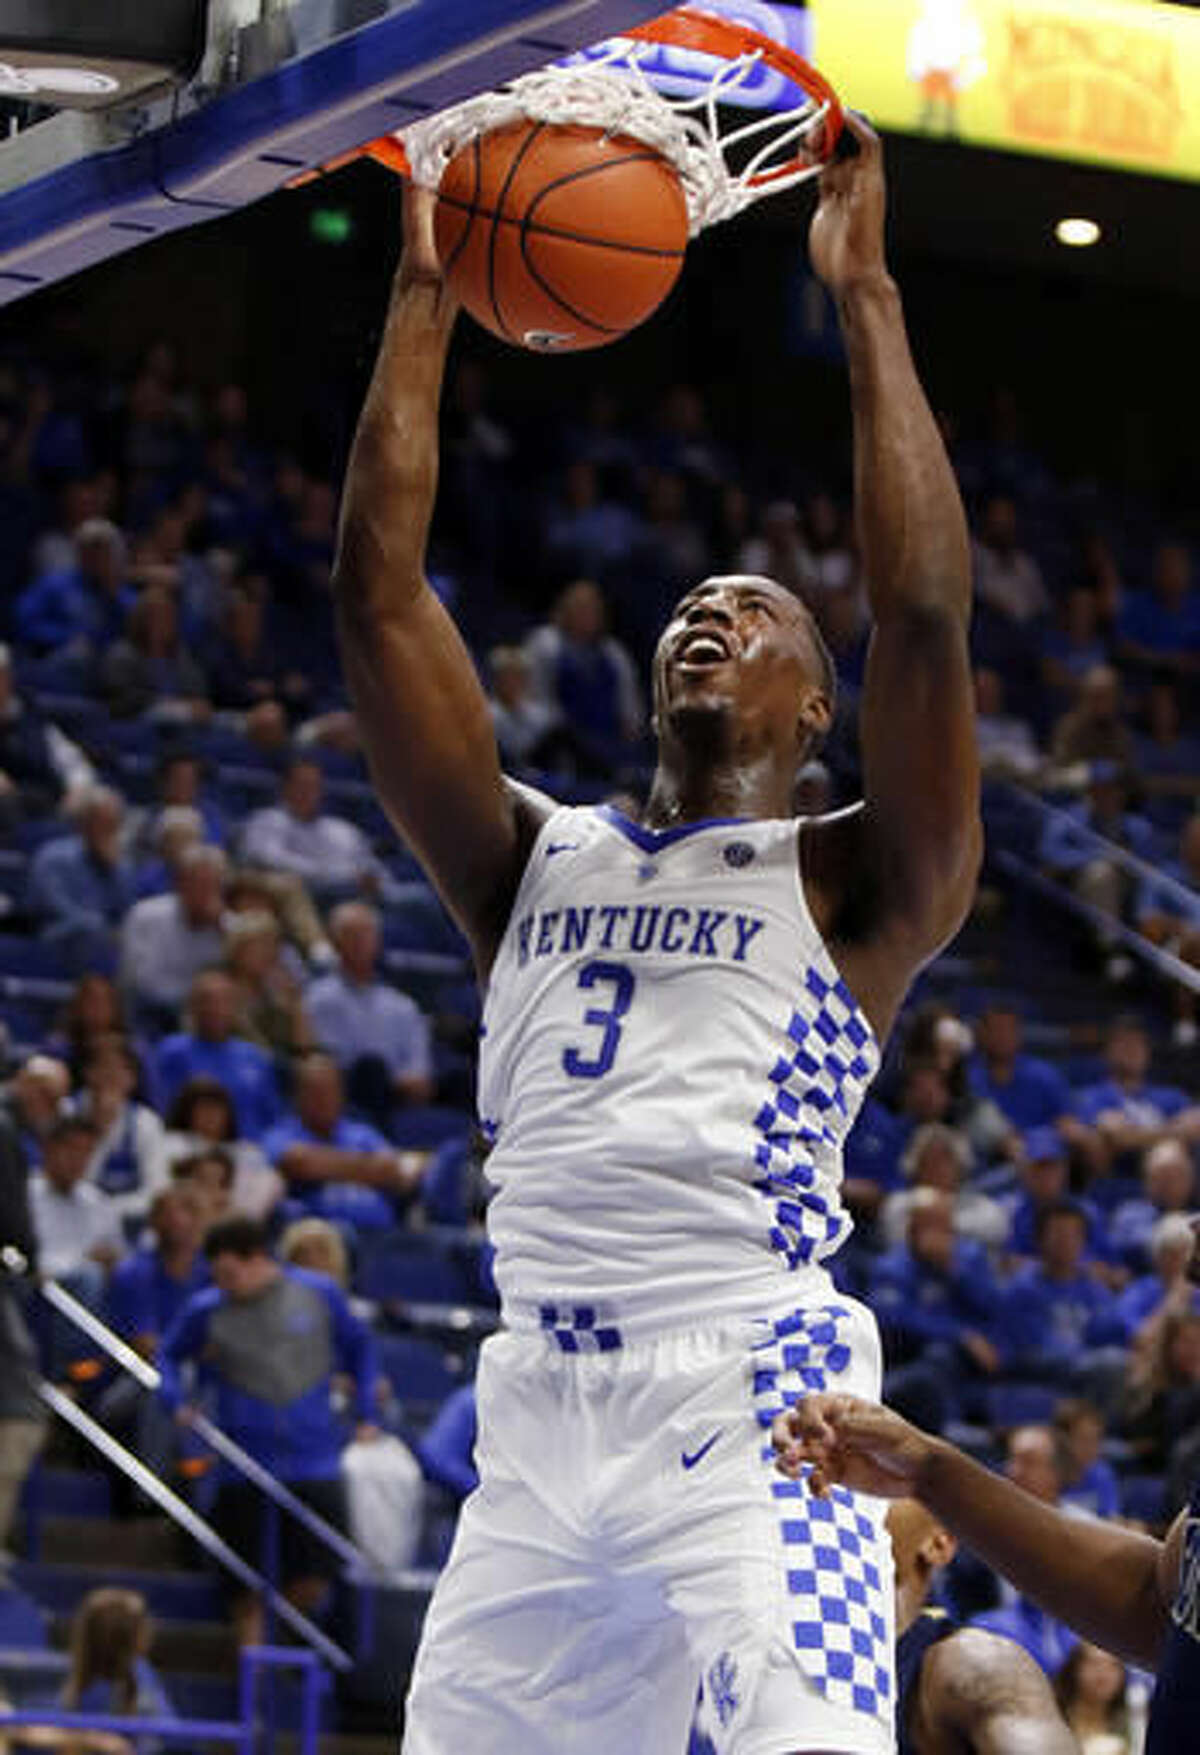 FILE - In this Oct. 30, 2016, file photo, Kentucky's Bam Adebayo dunks during the second half of an NCAA college basketball exhibition against Clarion, in Lexington, Ky. Kentucky’s John Calipari landed five of the nation’s top 24 prospects according to composite rankings of recruiting websites compiled by 247Sports. The new Wildcats include guards De’Aaron Fox, Malik Monk, Bam Adebayo, Wenyen Gabriel and Sacha Killeya-Jones. (AP Photo/James Crisp, File)